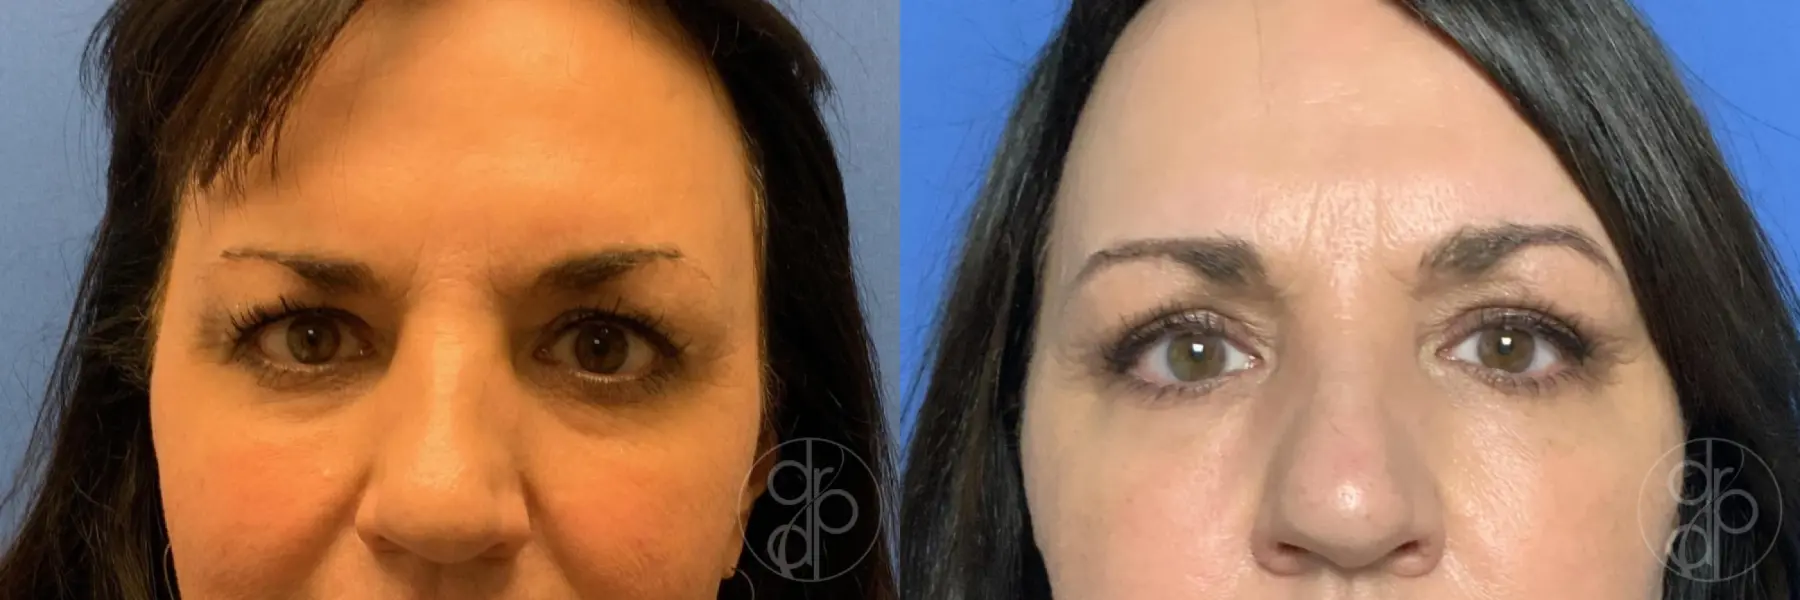 patient 10706 blepharoplasty before and after result - Before and After